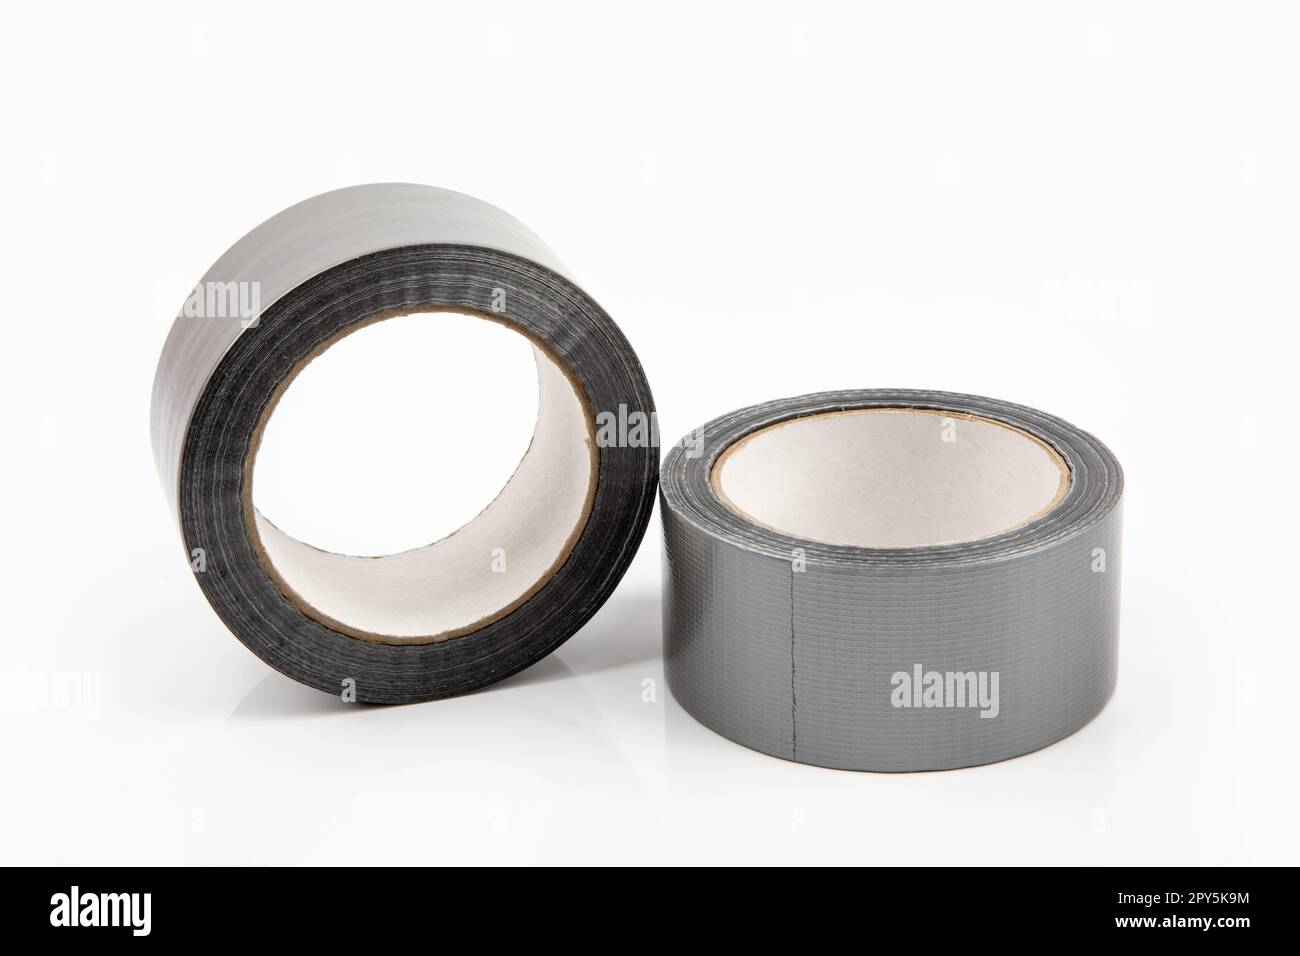 Roll of a dhesive Tape isolated over white background Stock Photo